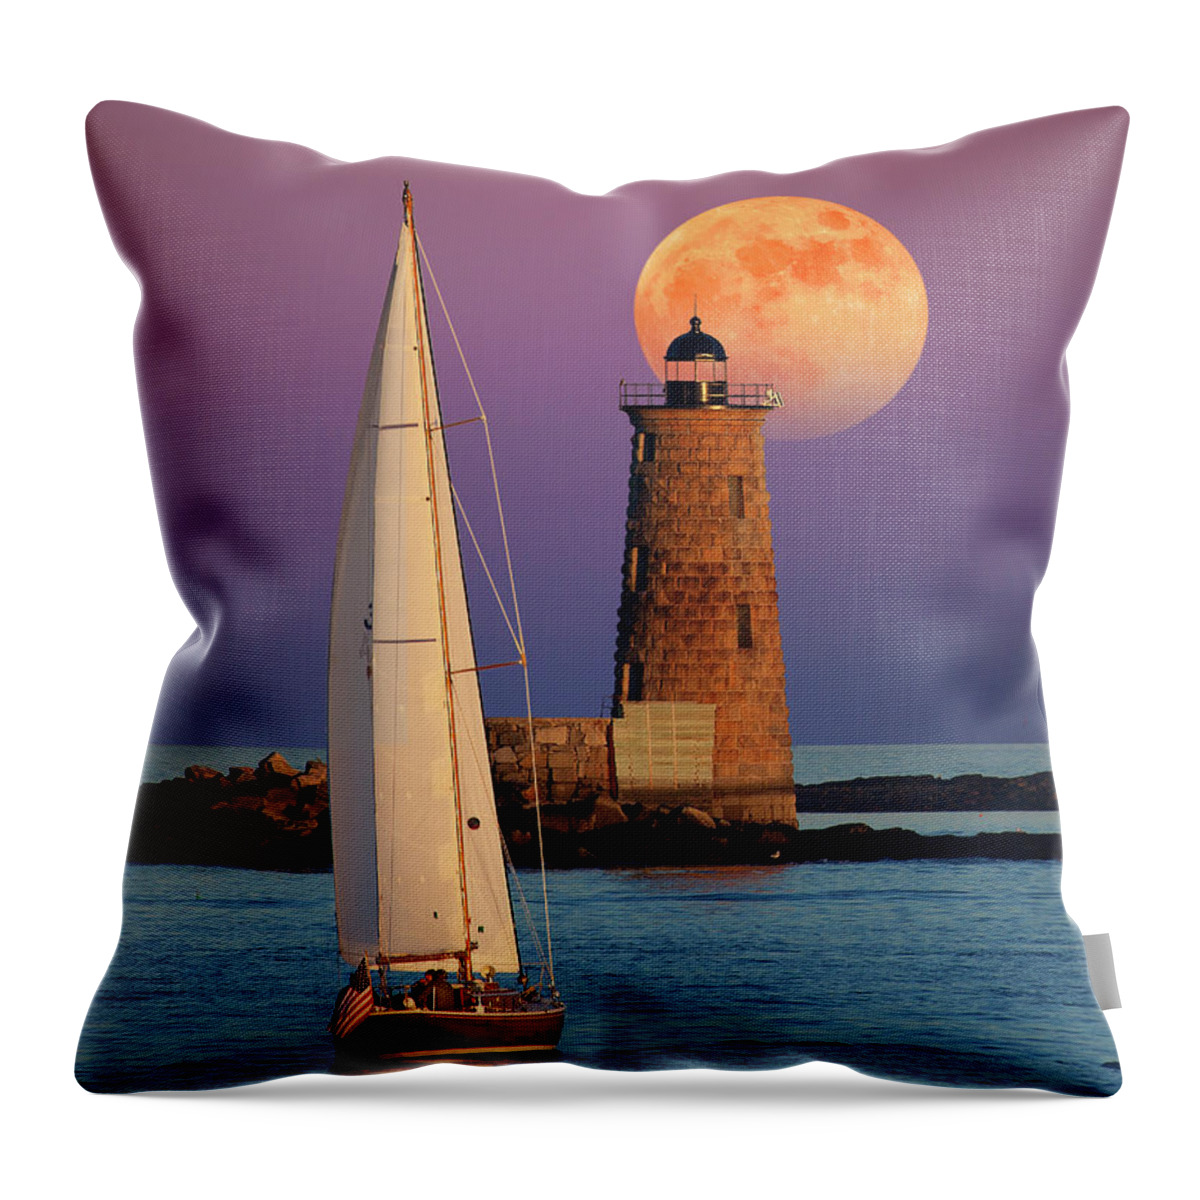 Moon Lunar Full Moon Sea Sailboat Boat Sunset Sunrise Dawn Dusk Astronomy Astronomical Water Peaceful Peace Quiet Nautical Lighthouse Light House Seashore Throw Pillow featuring the photograph Convergence #1 by Larry Landolfi